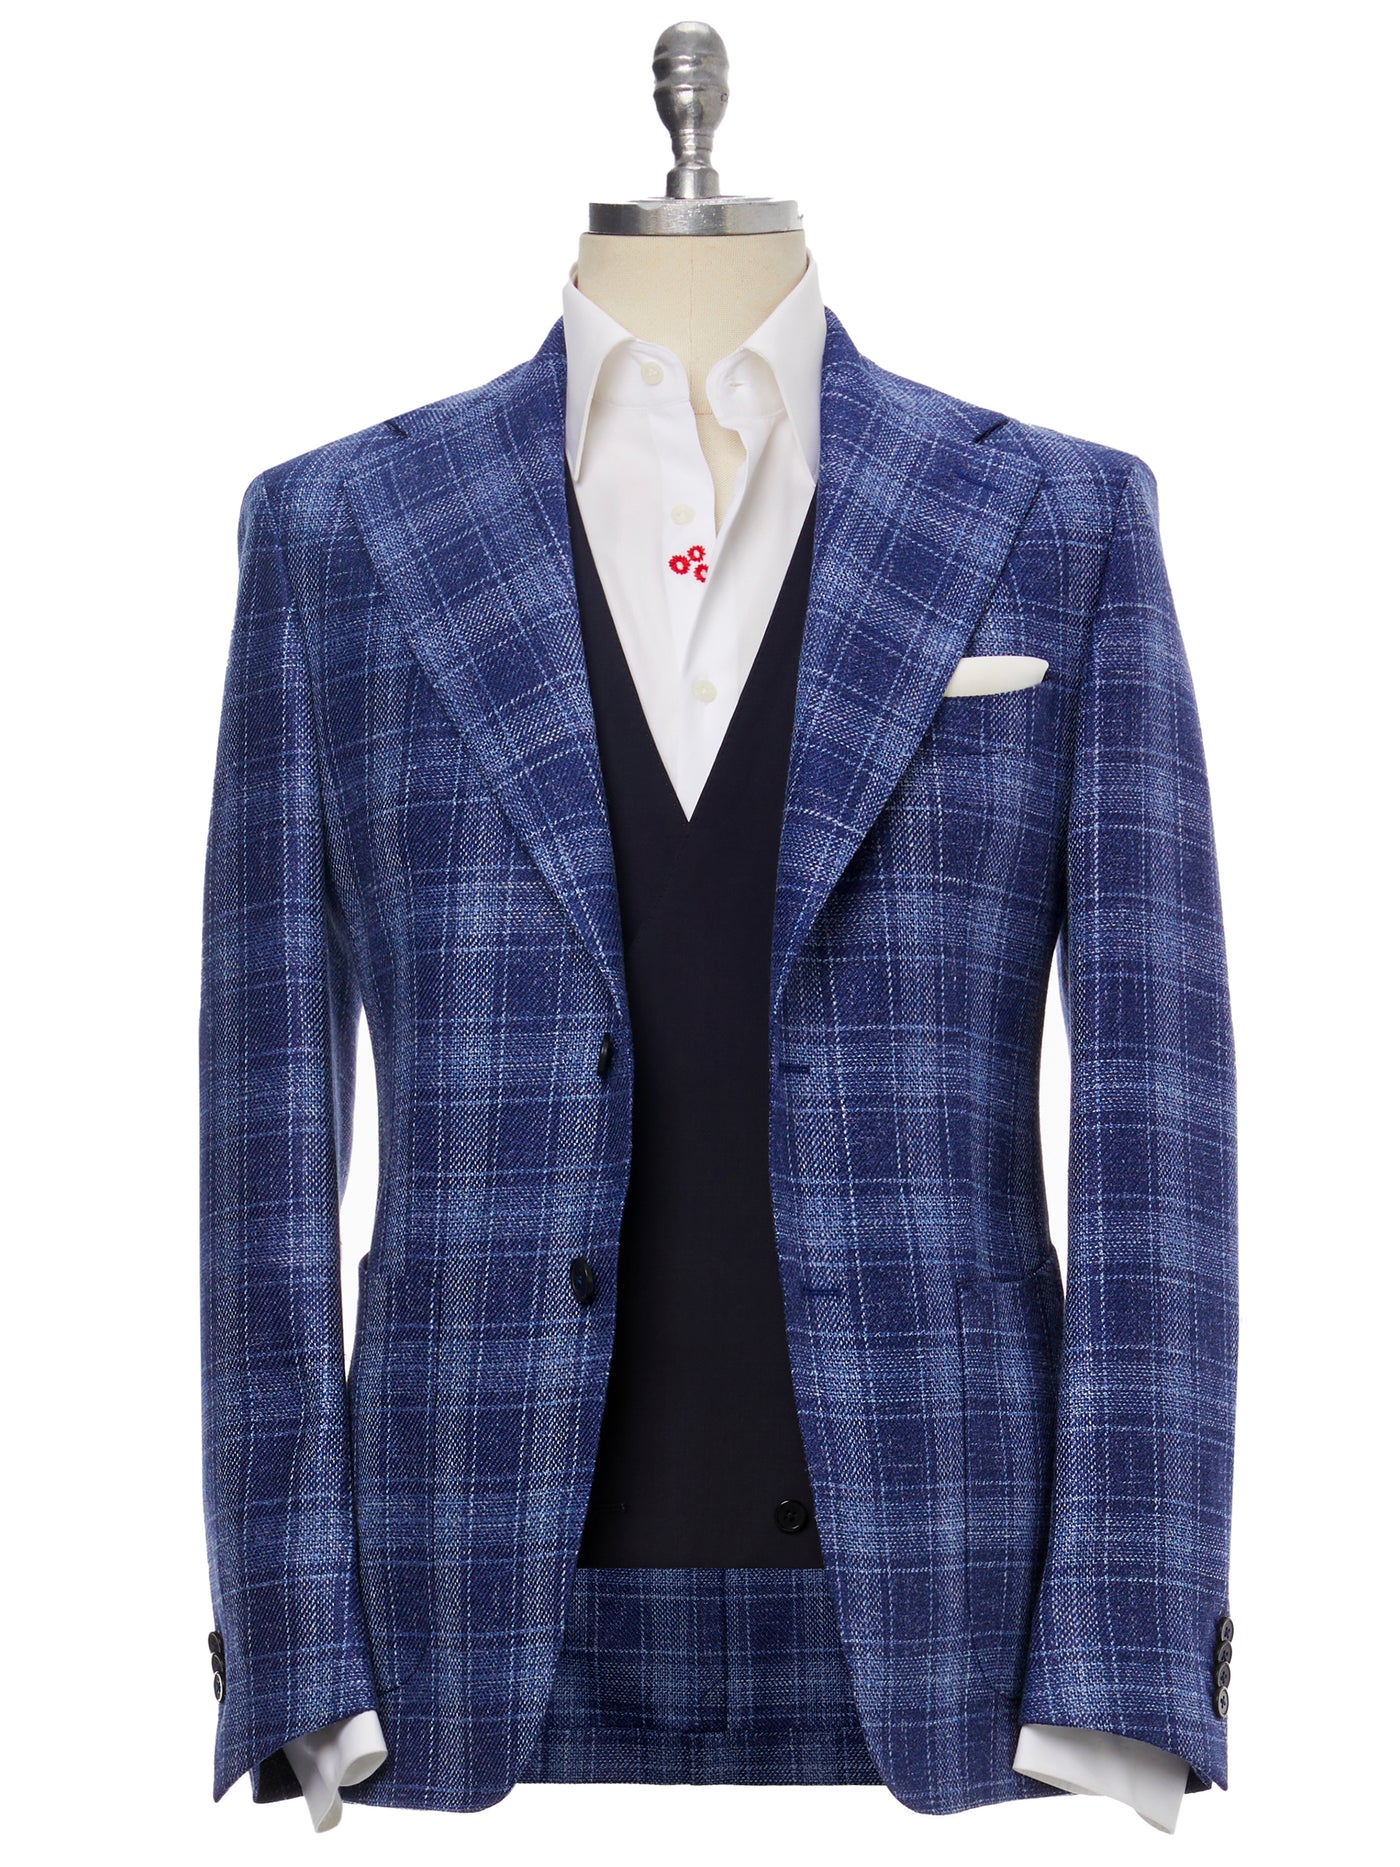 Sacou navy check, tailored fit